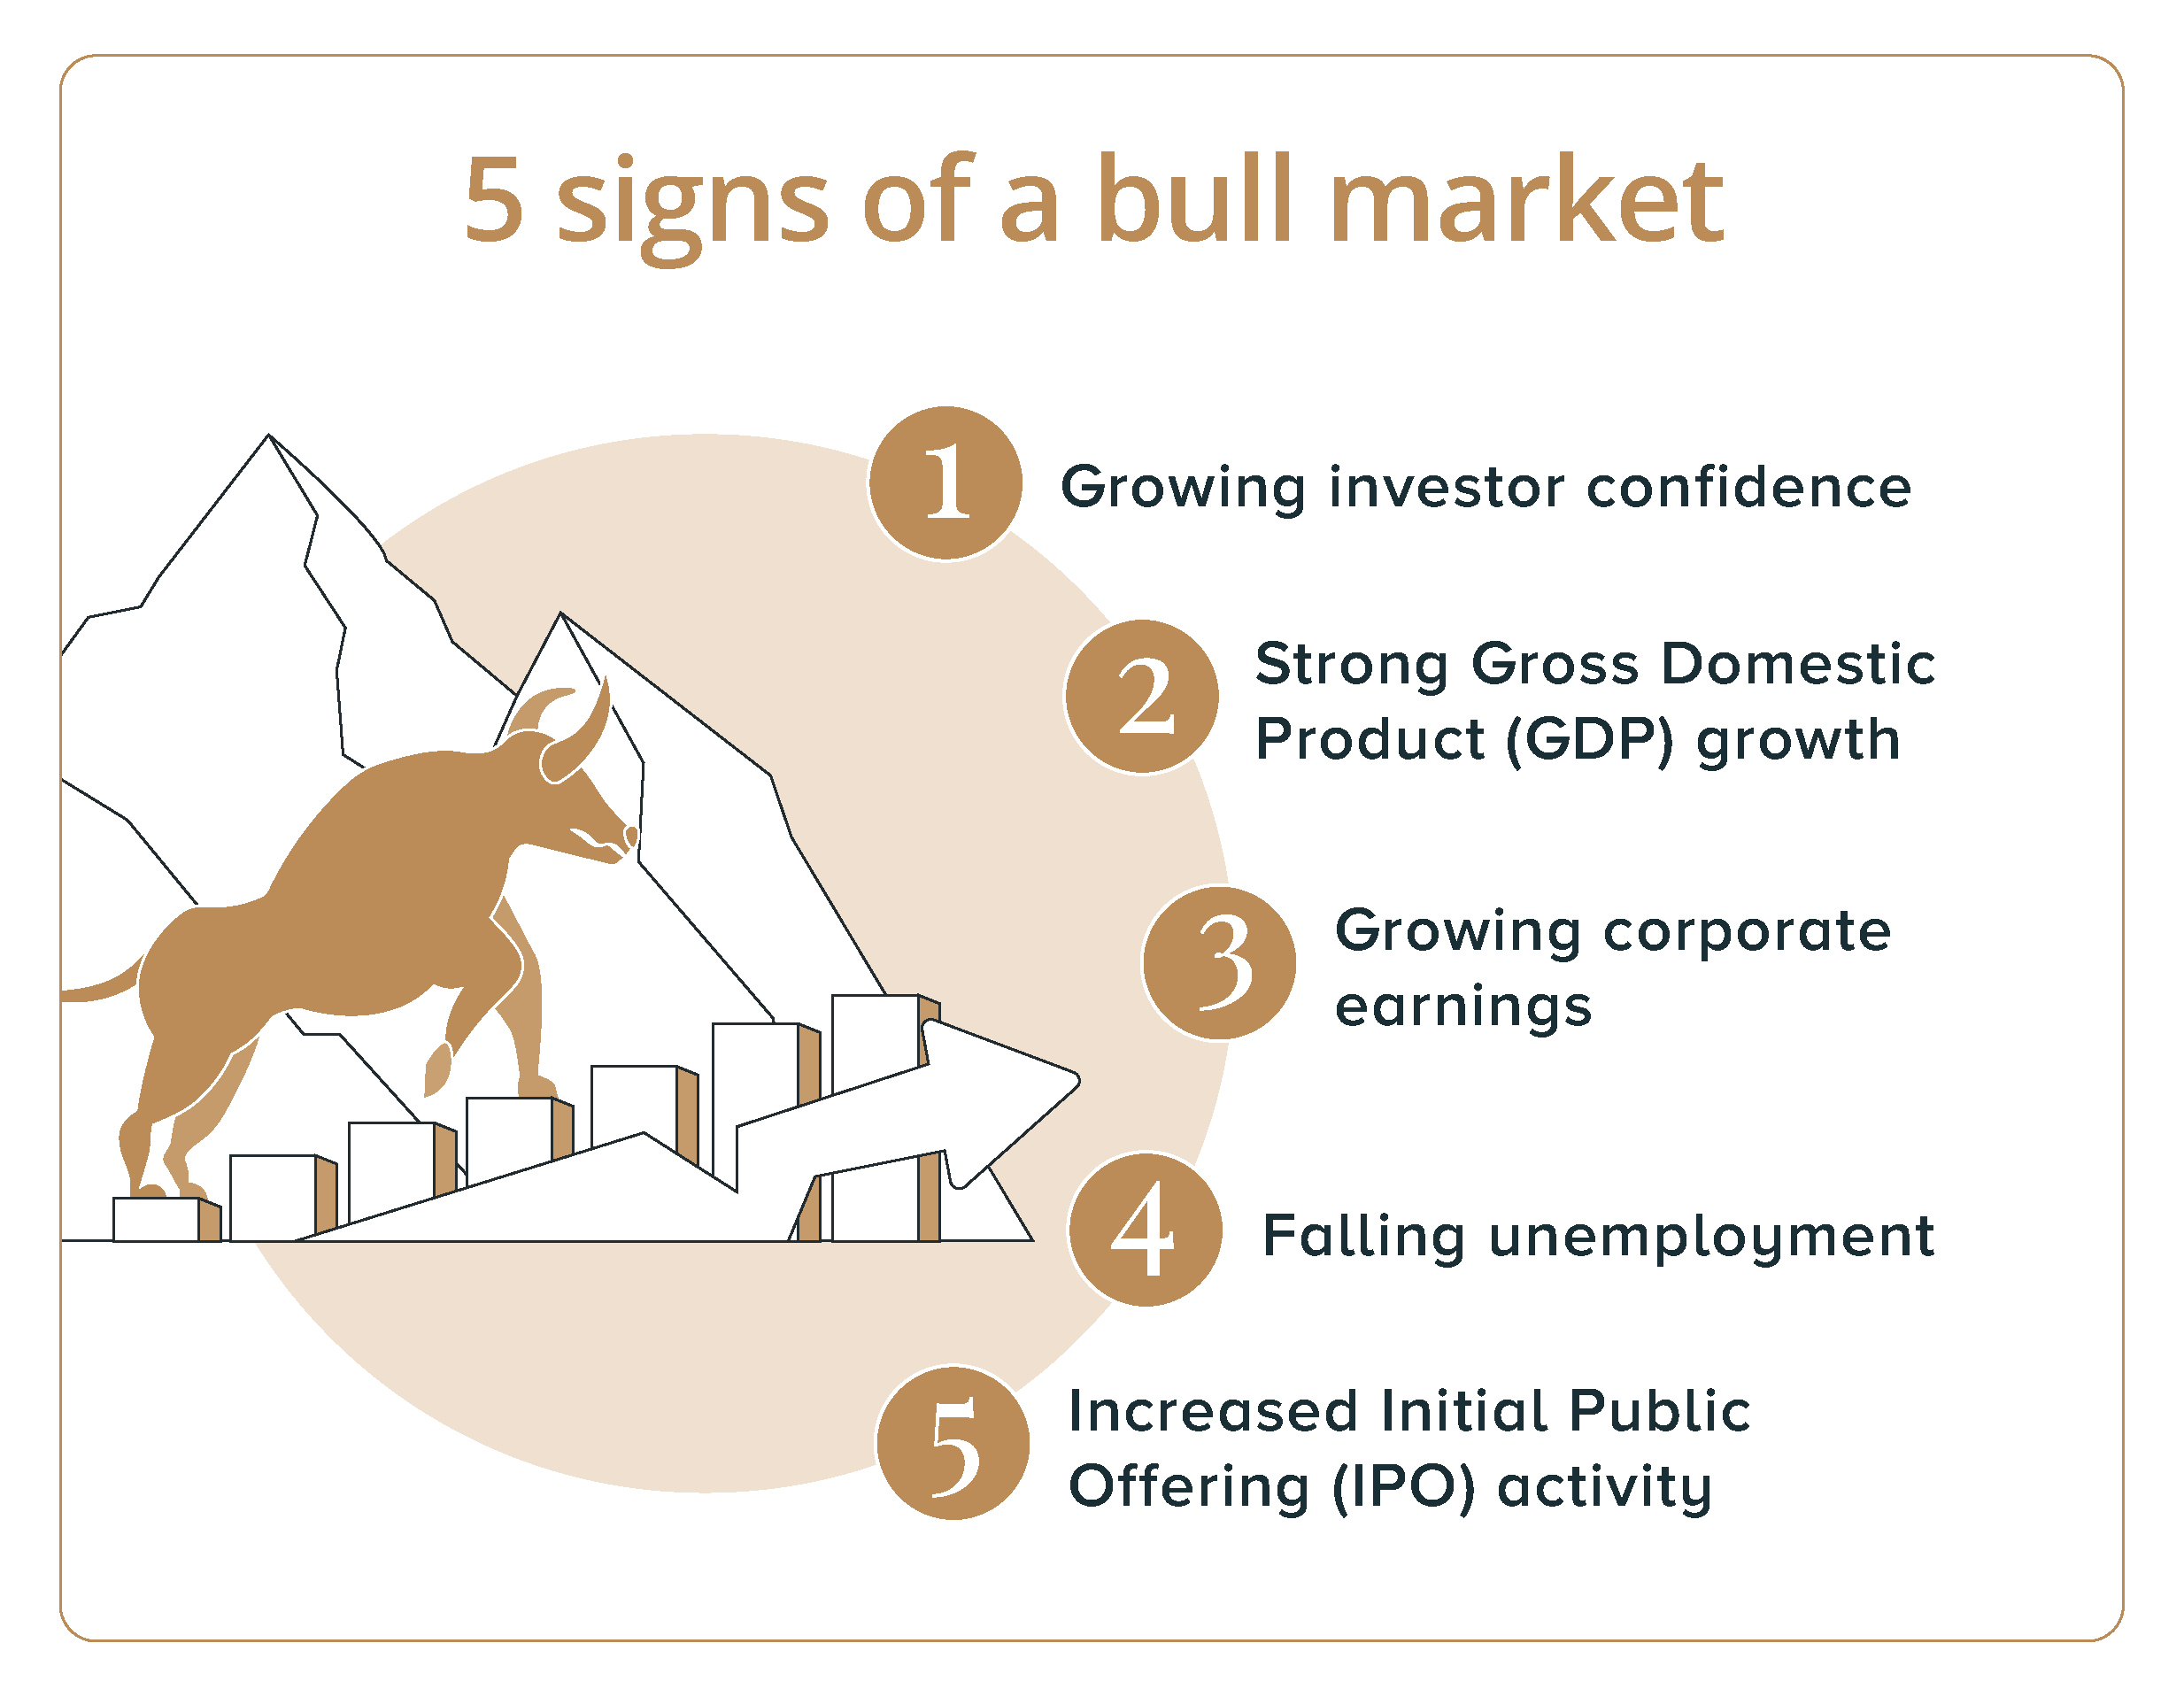 5 signs of a bull market